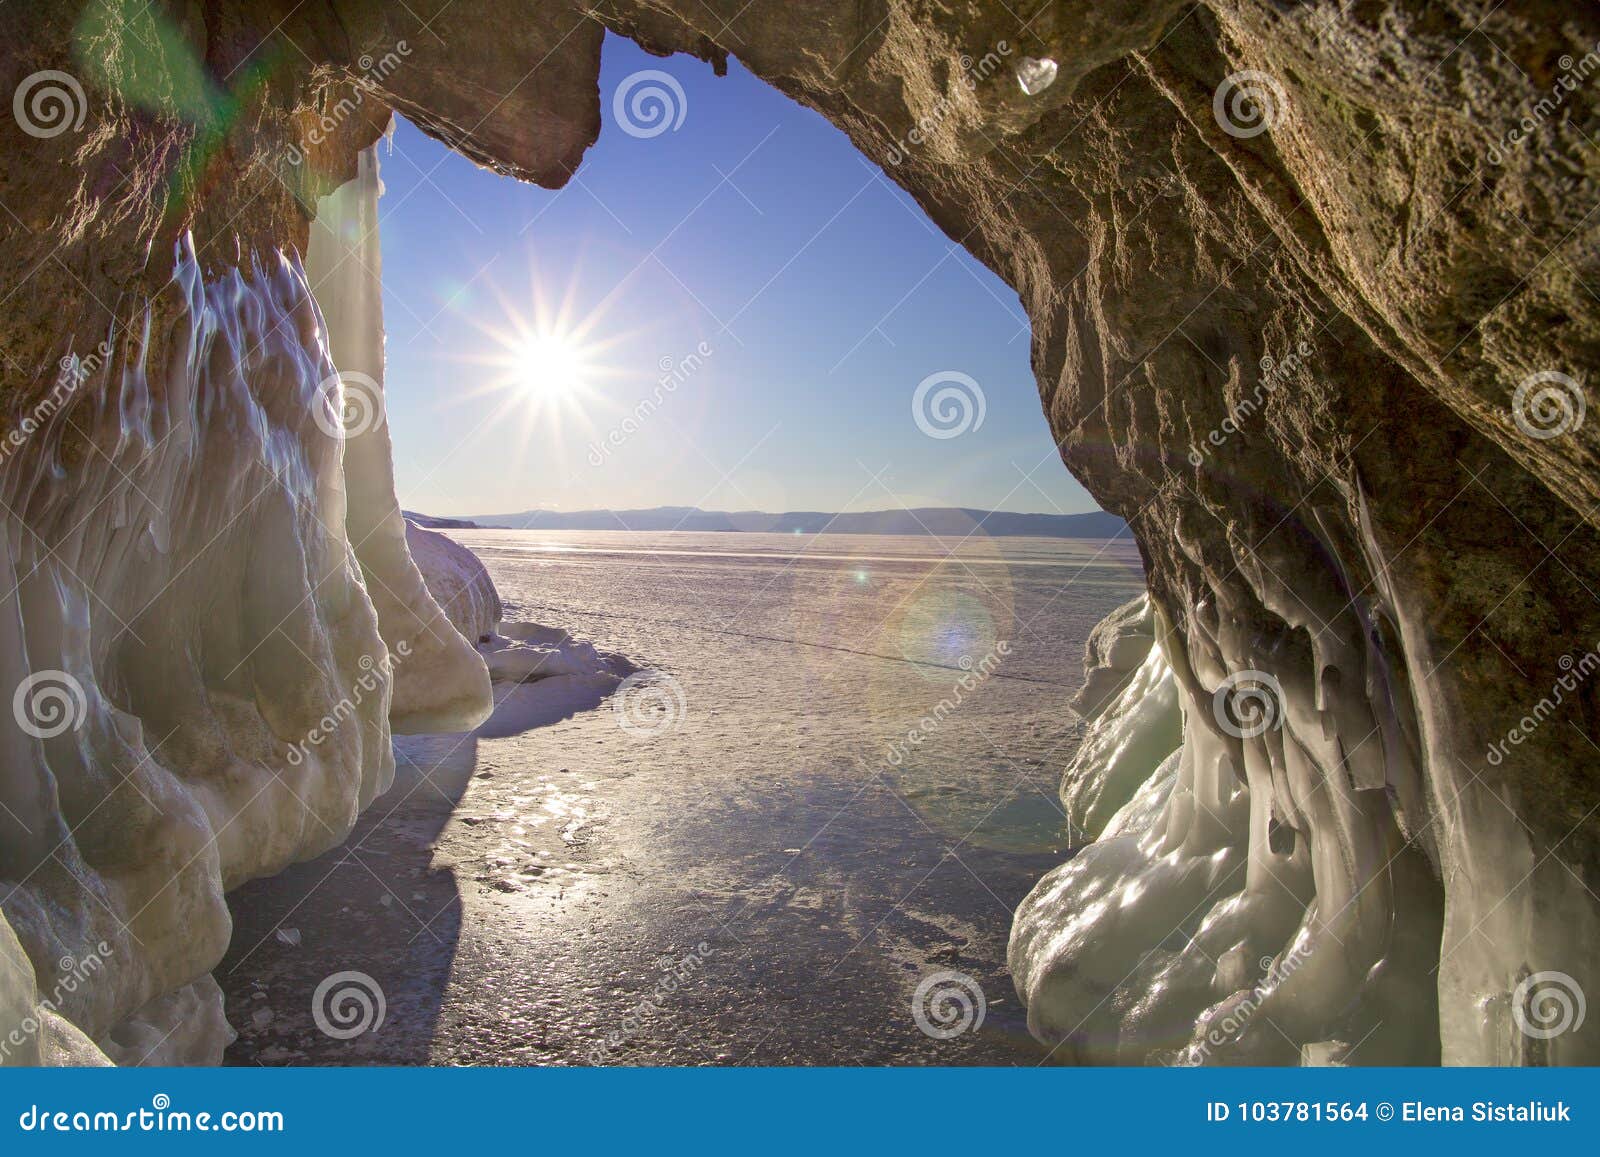 the view from the grotto with icicles, chunks of ice and hummocks to the sun and blye sky. natural background.